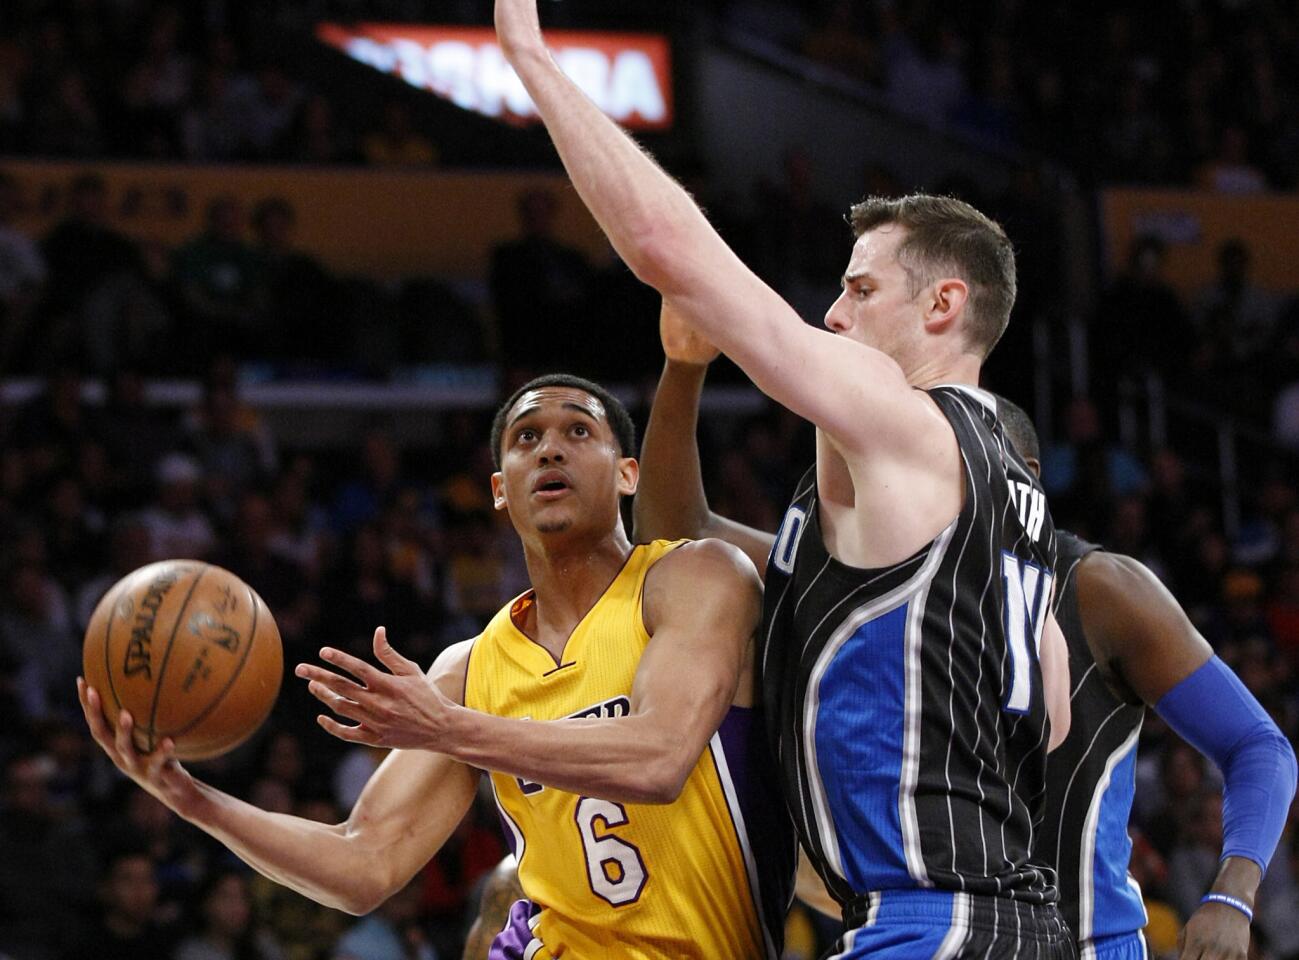 Lakers guard Jordan Clarkson drives around Magic center Jason Smith for a first-quarter basket on March 8 at Staples Center.